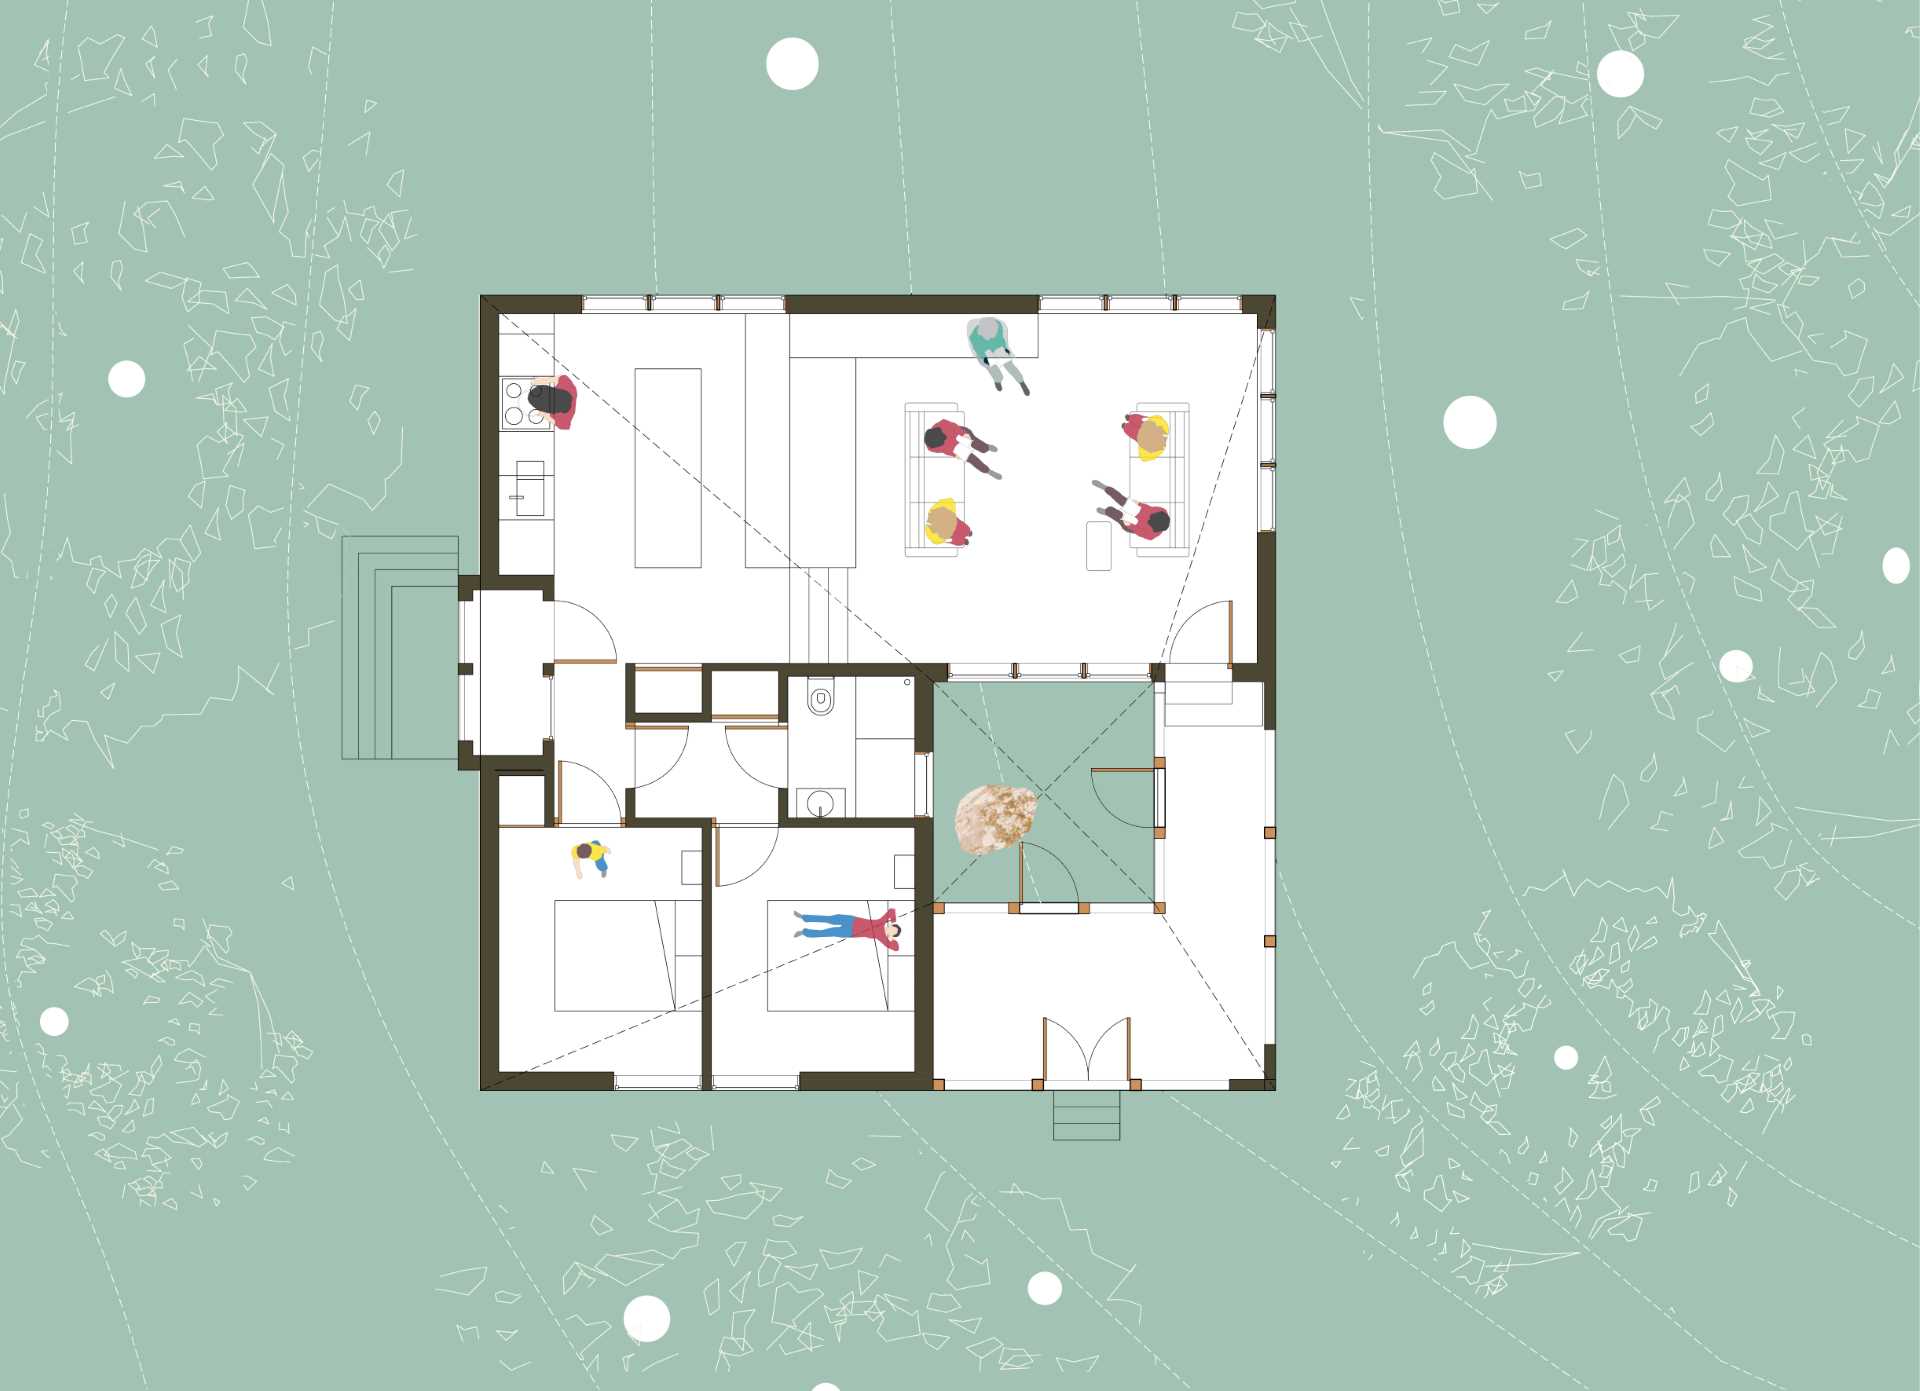 The floor plan of a small 2 bedroom cabin.